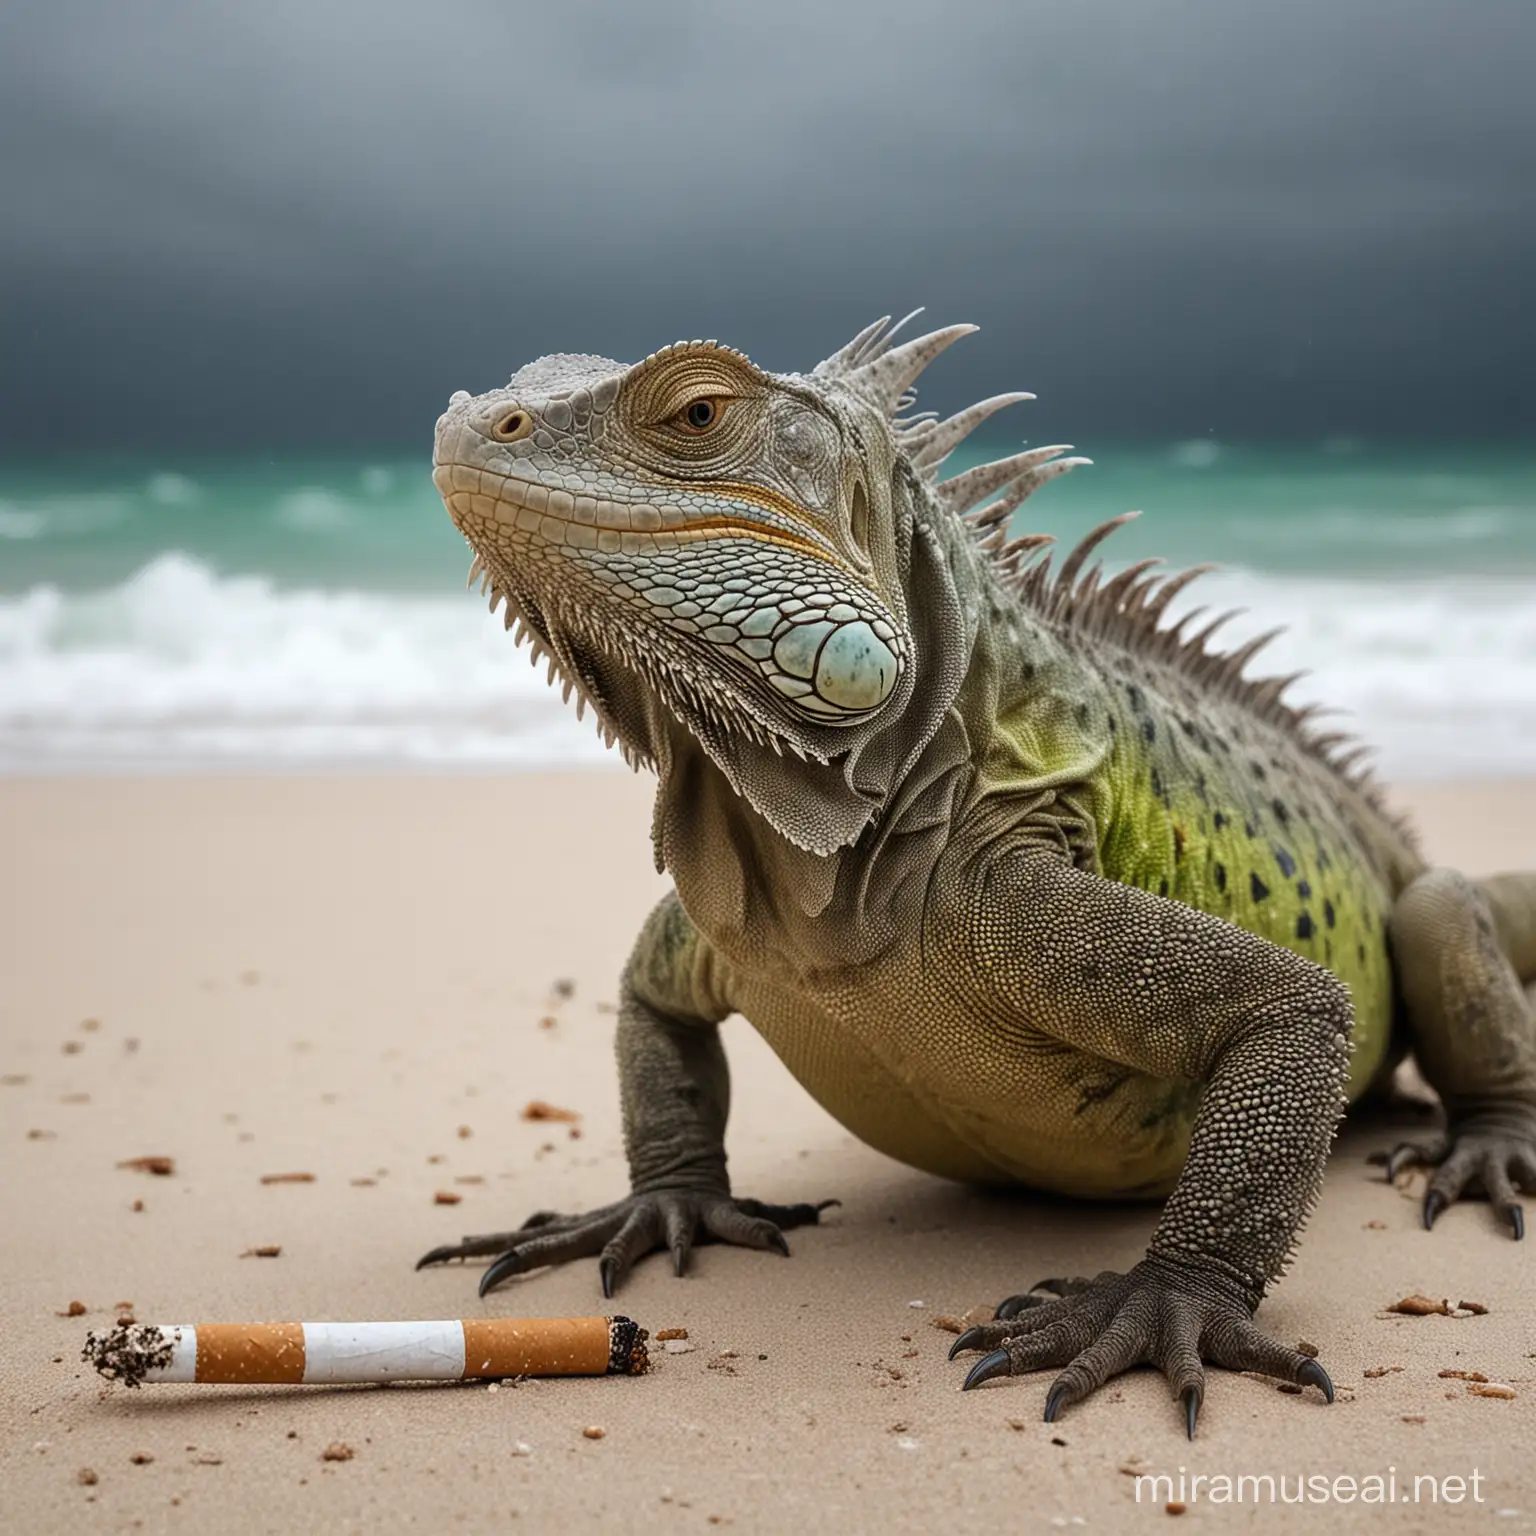 iguana on the beach in winter under the storm with a cigarette in the mouth